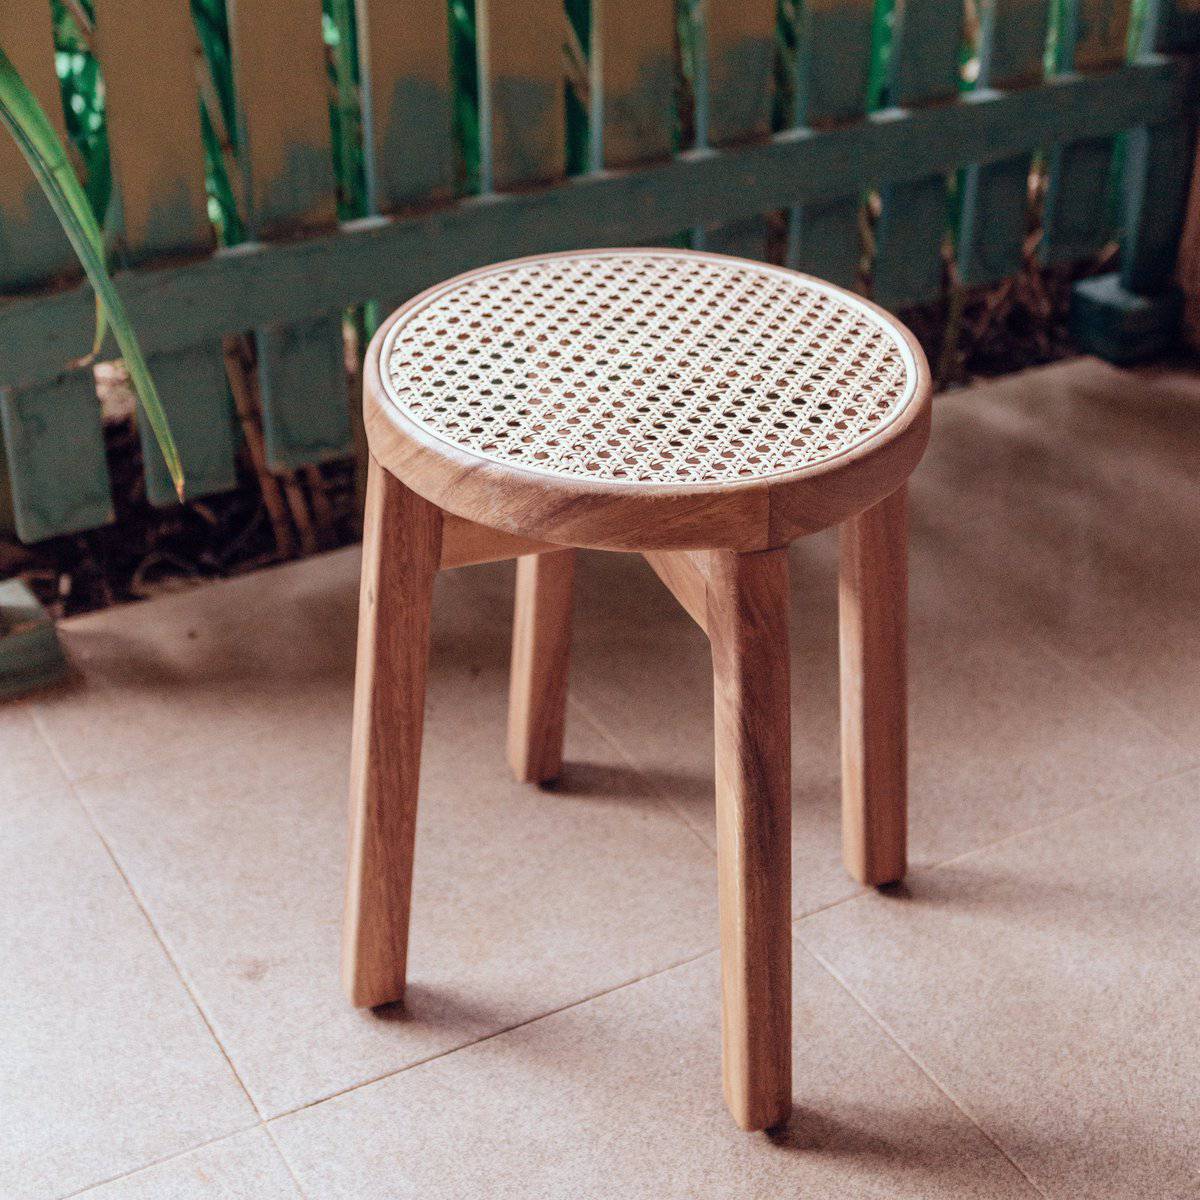 Wooden Stool CARAMIN made of Trembesi with a Seating Surface from Woven Rattan - Goldgenix